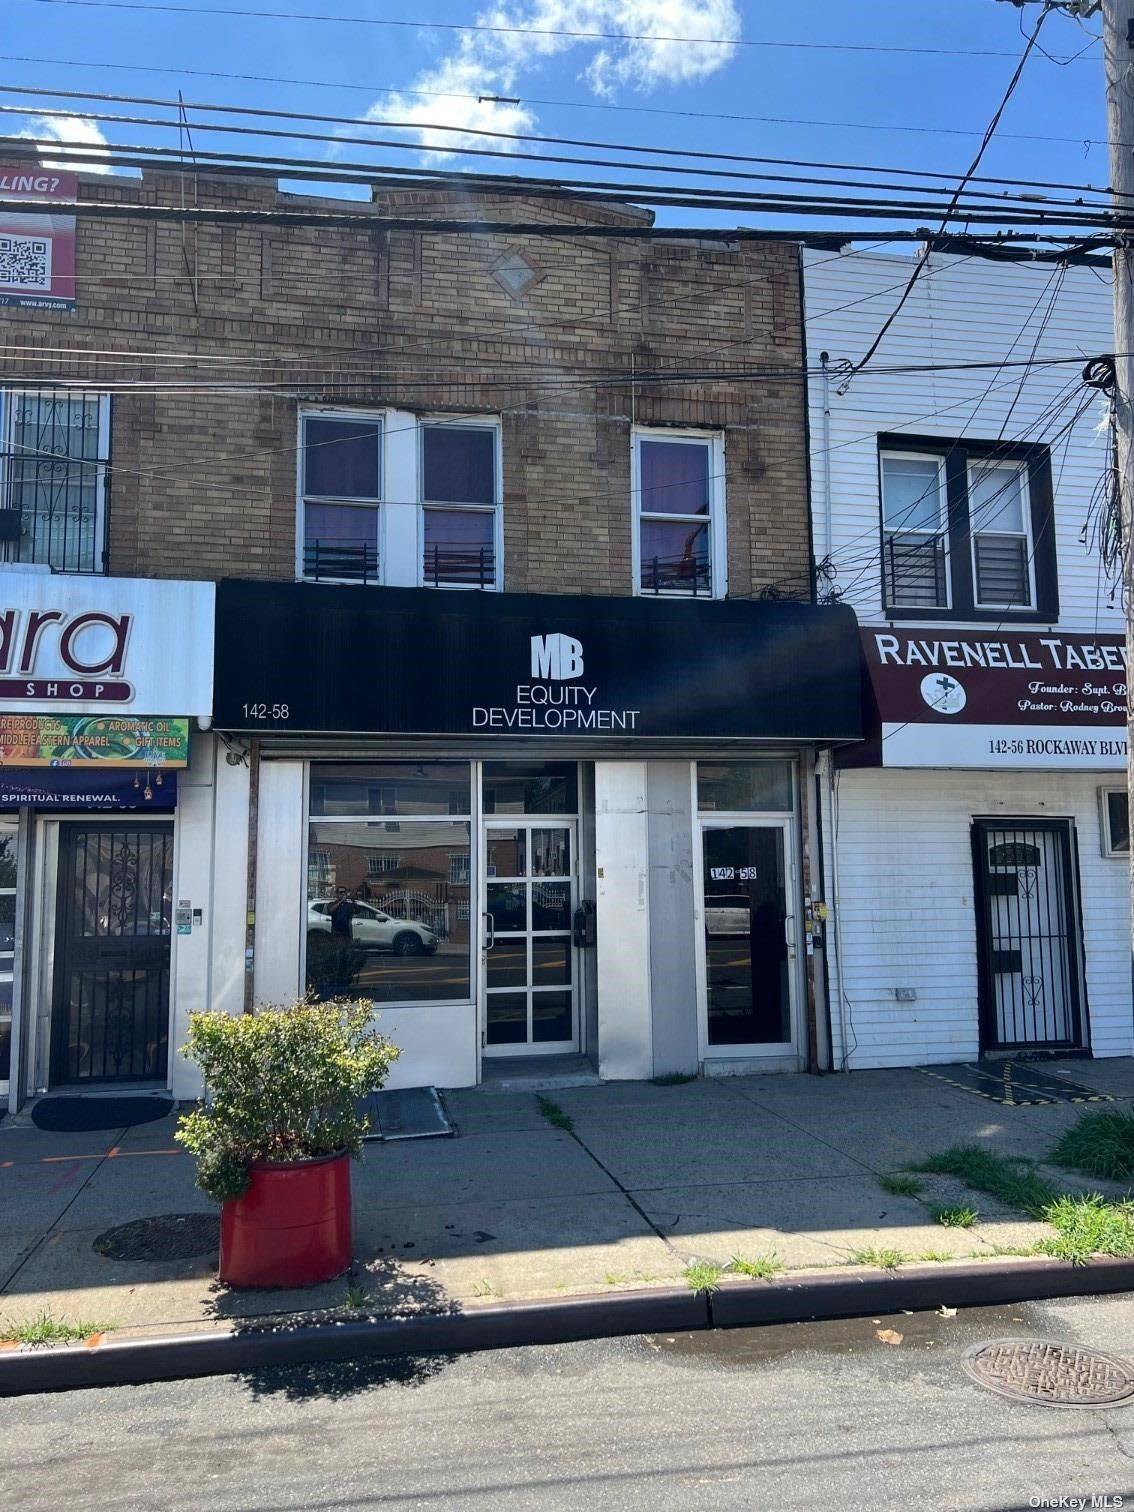 Mix Use Property for Sale on Rockaway Blvd.